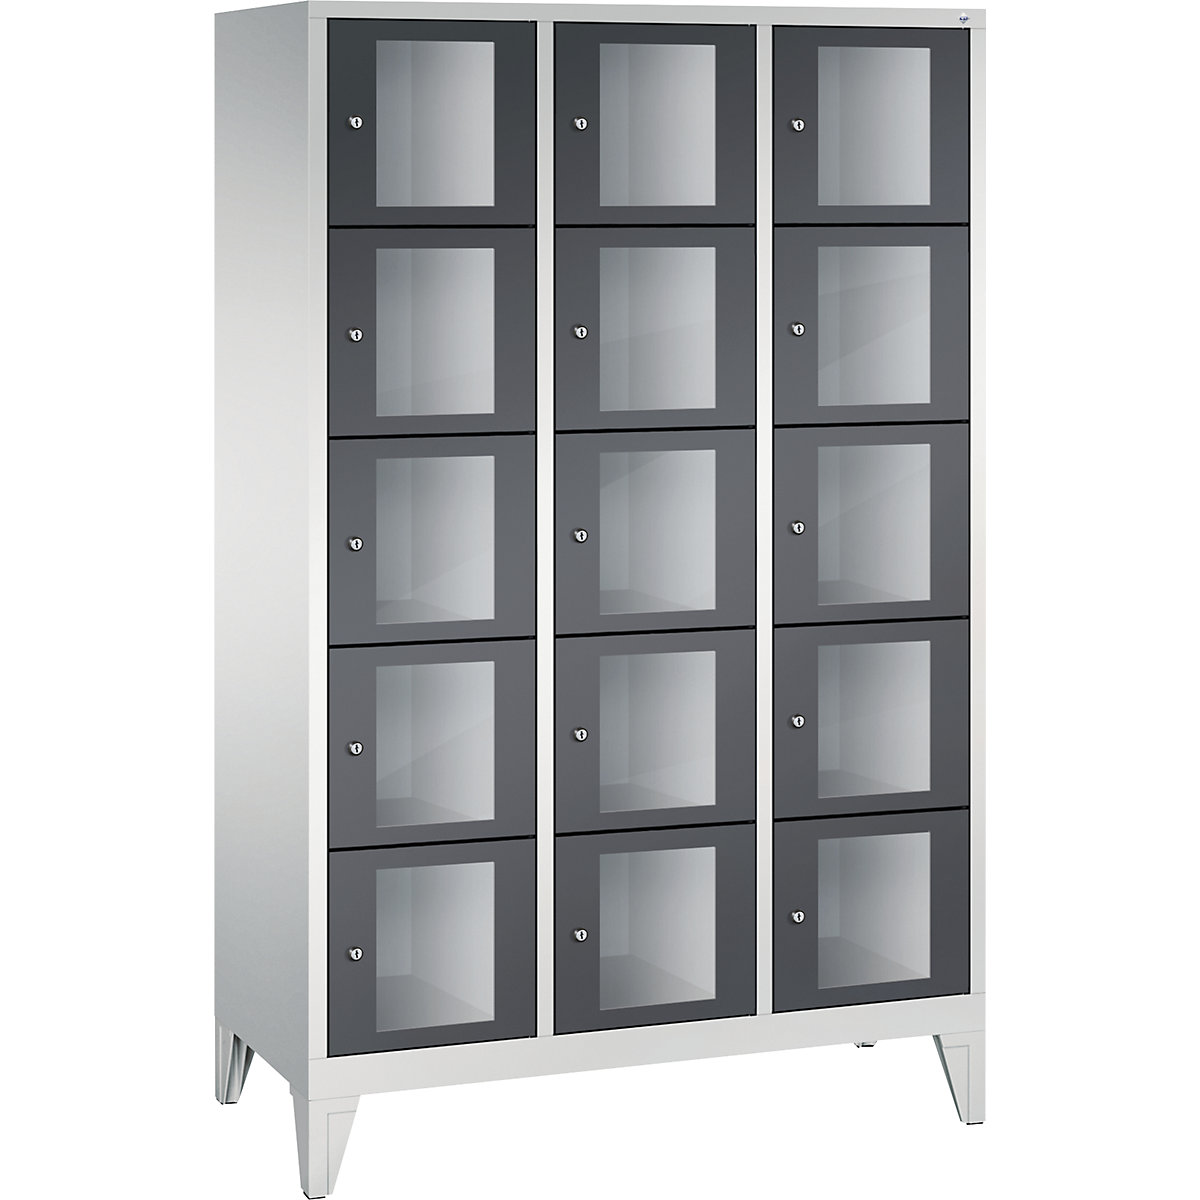 C+P – CLASSIC locker unit, compartment height 295 mm, with feet, 15 compartments, width 1200 mm, black grey door